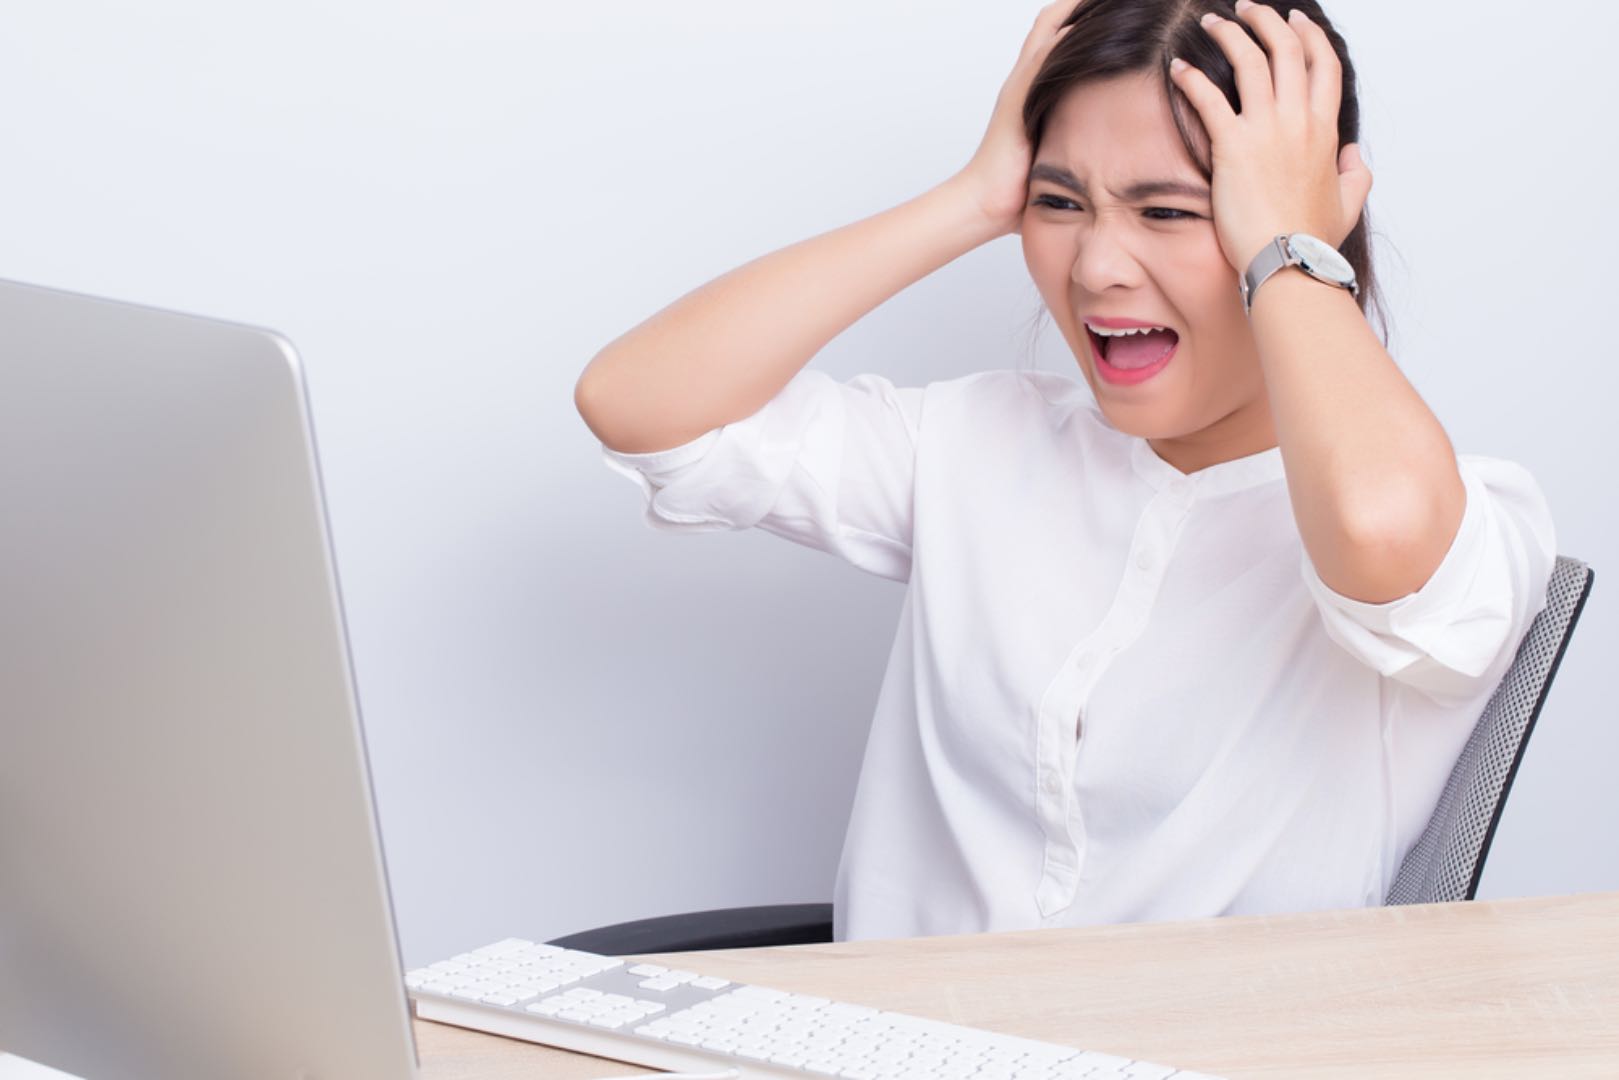 boring blog writing can quickly anger people